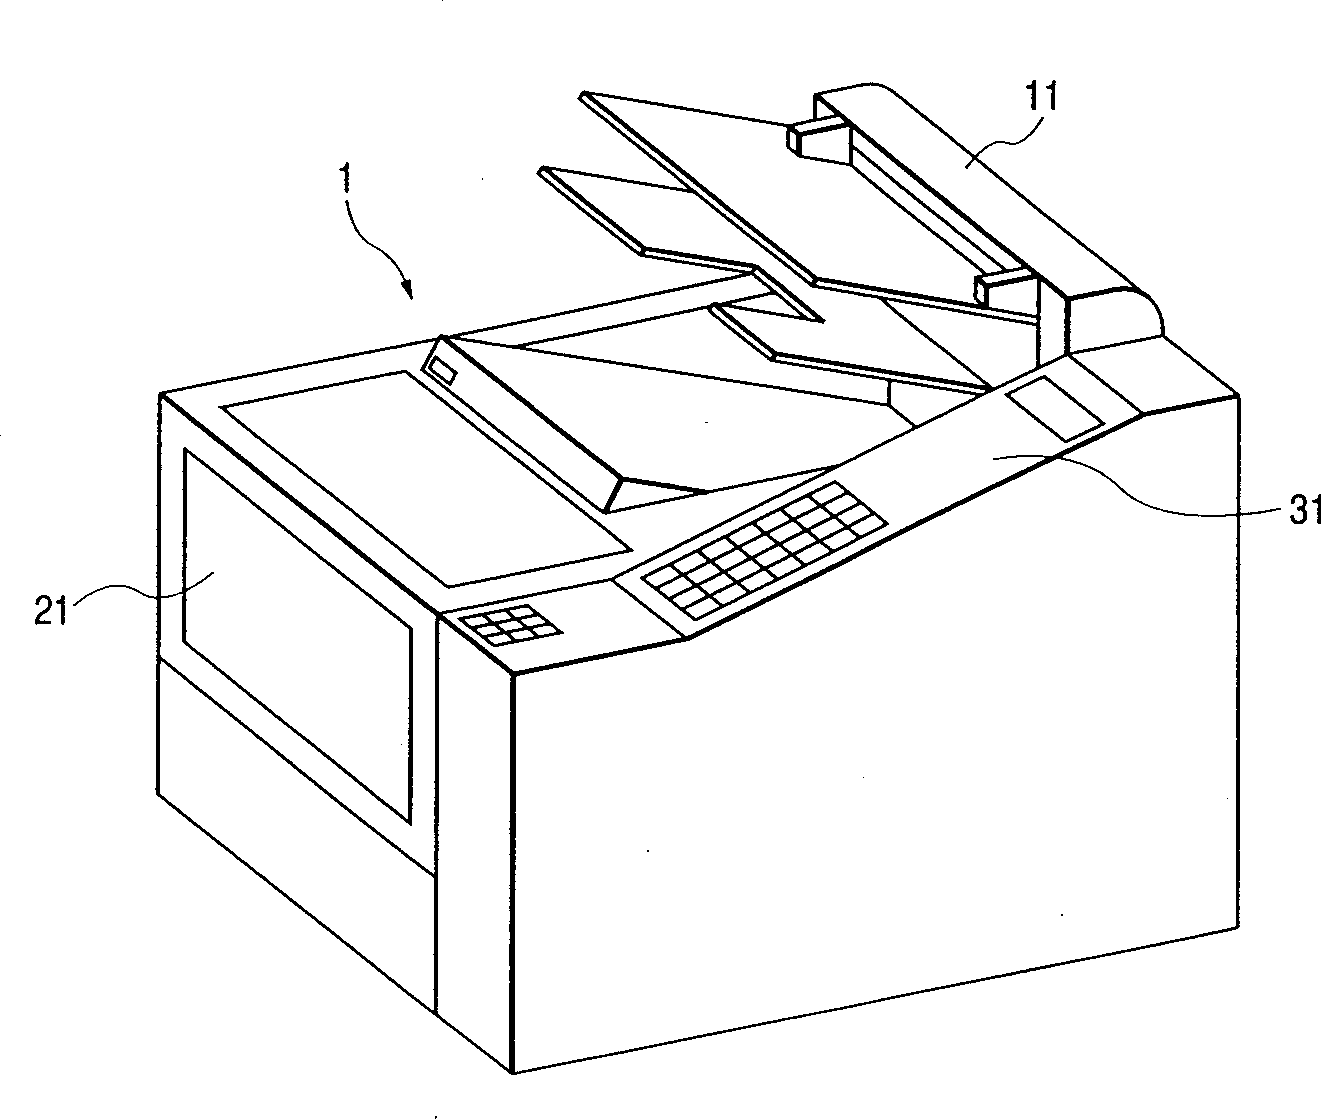 Double side image reading device